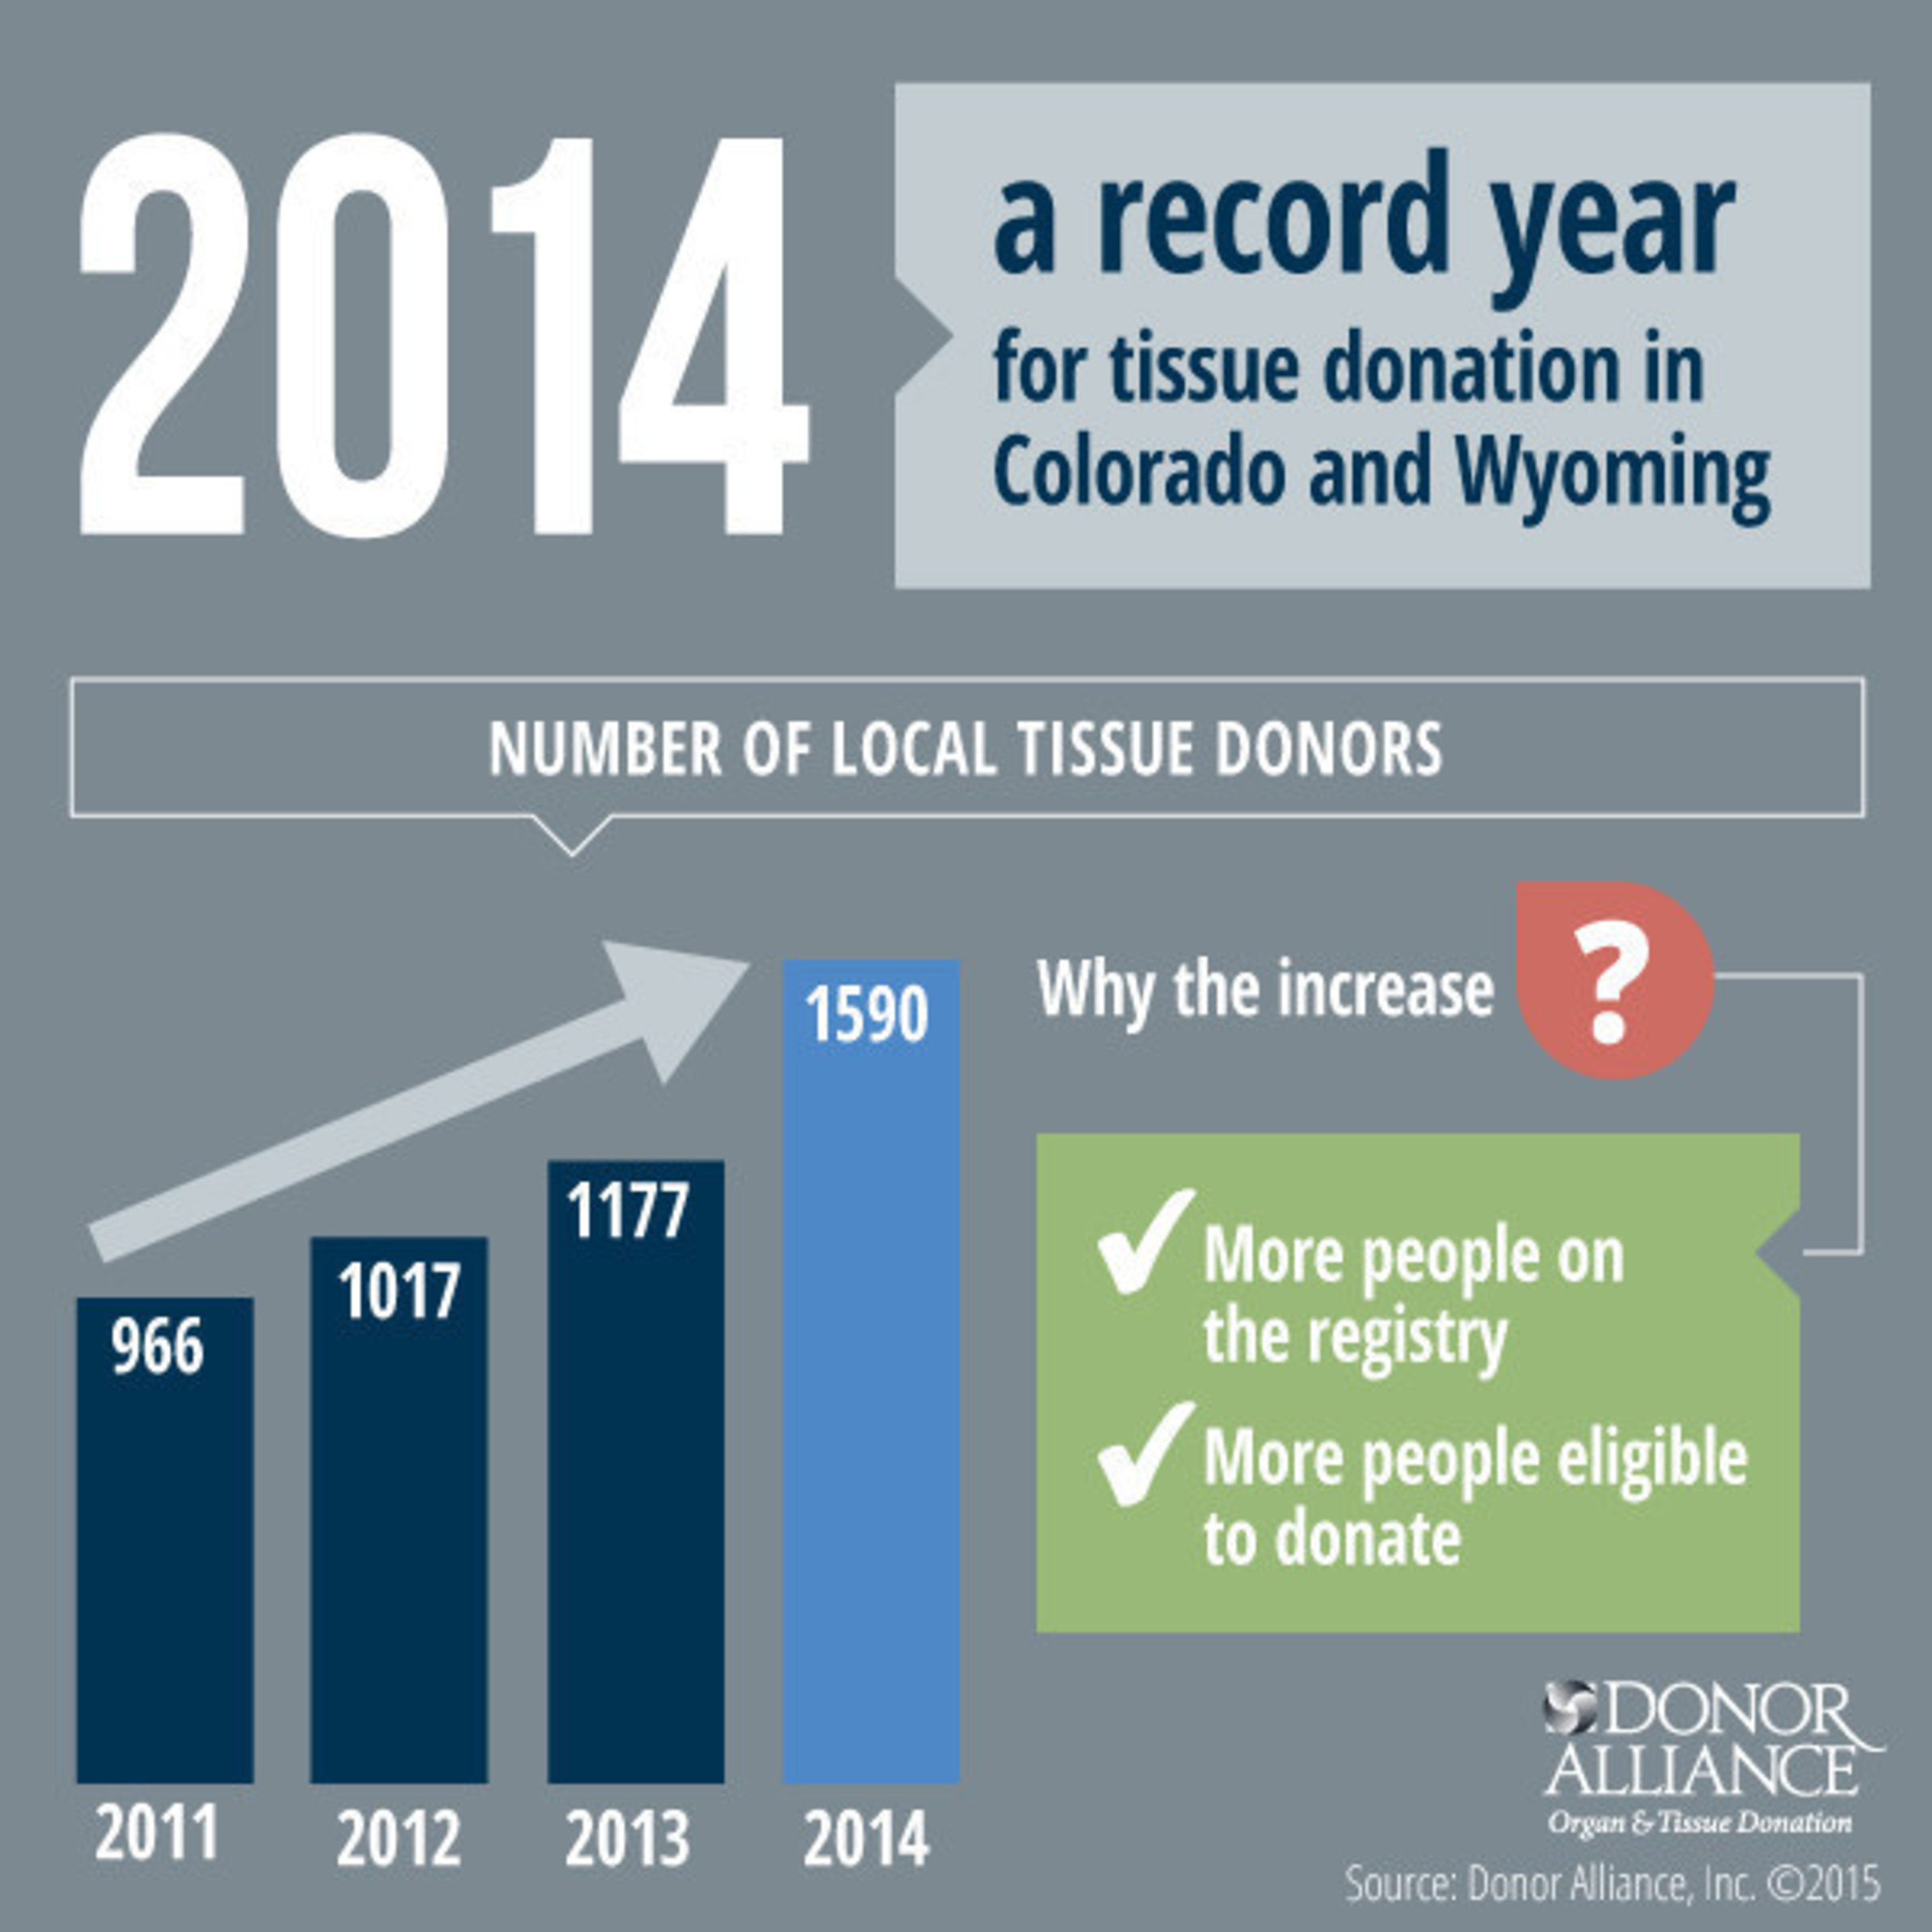 2014 was a record year for tissue donation in Colorado and Wyoming.